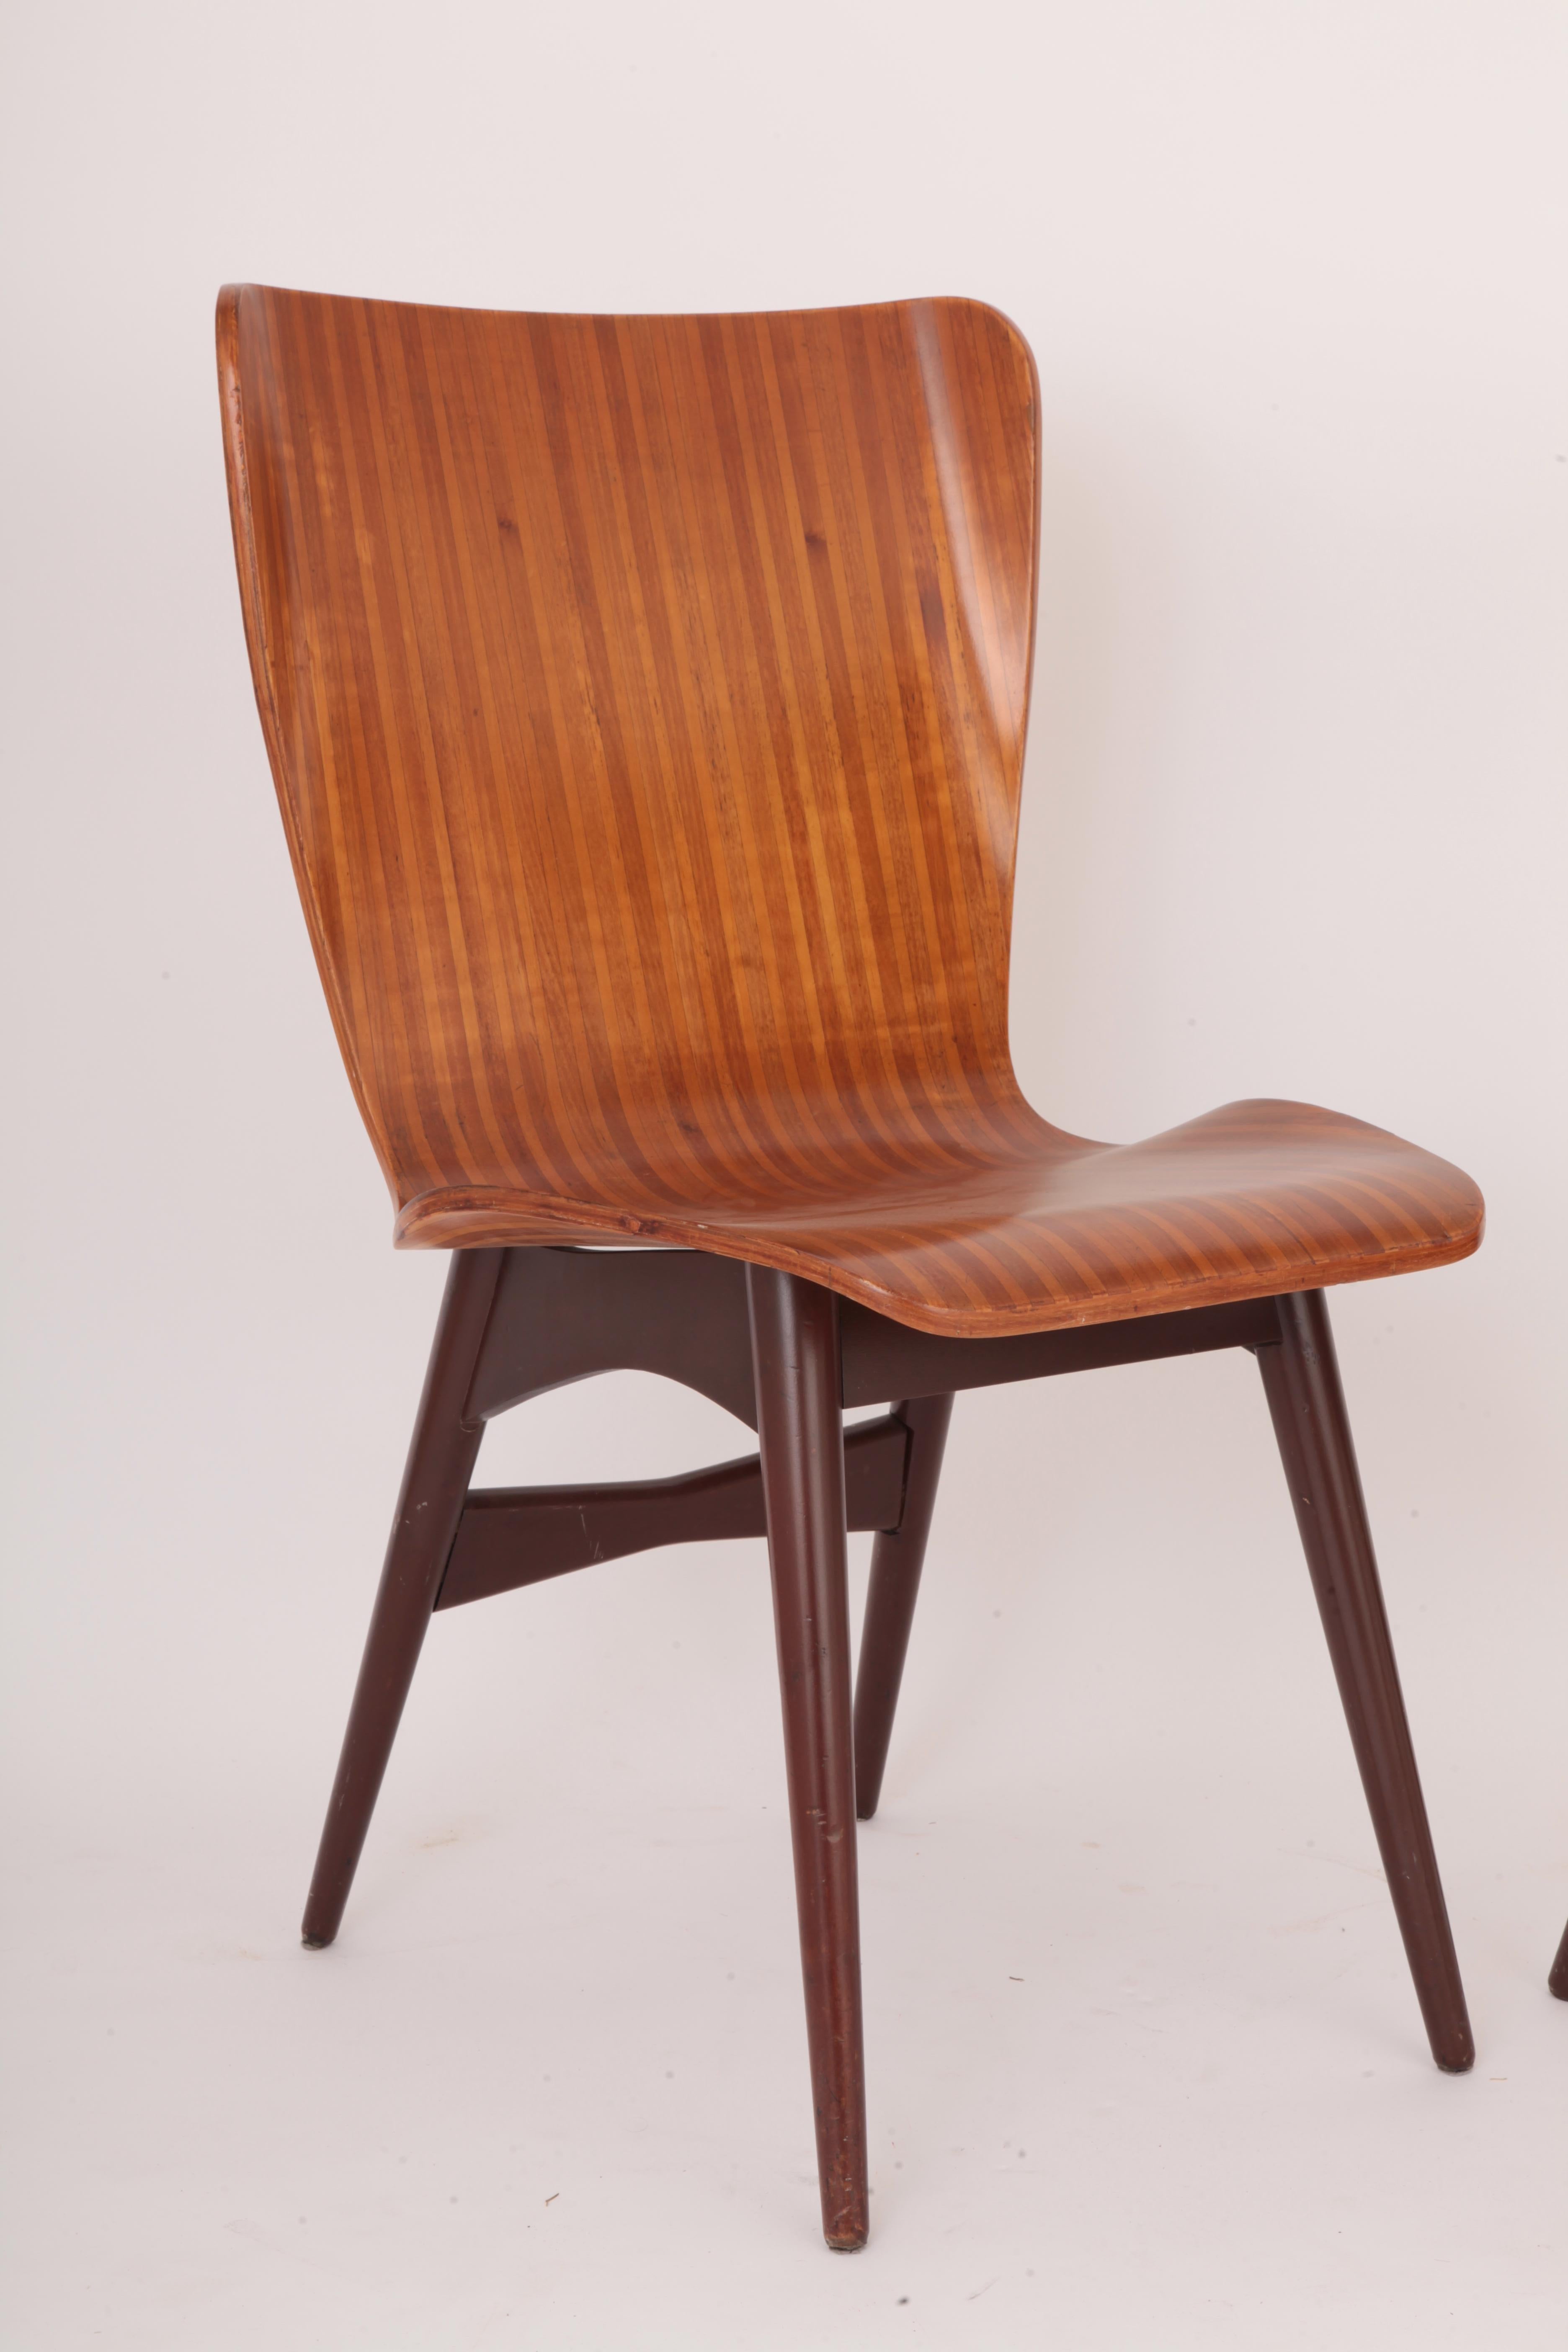 Pair of chairs by Cimo Factory, Brazil, 1960
Delicate machinery of two types of wood: pau marfim and imbuia wood.
A curvy Modern design with elegant lines.
Cimo Factory was producing high-quality craftsmanship in Brazil by the diffusion of Modern